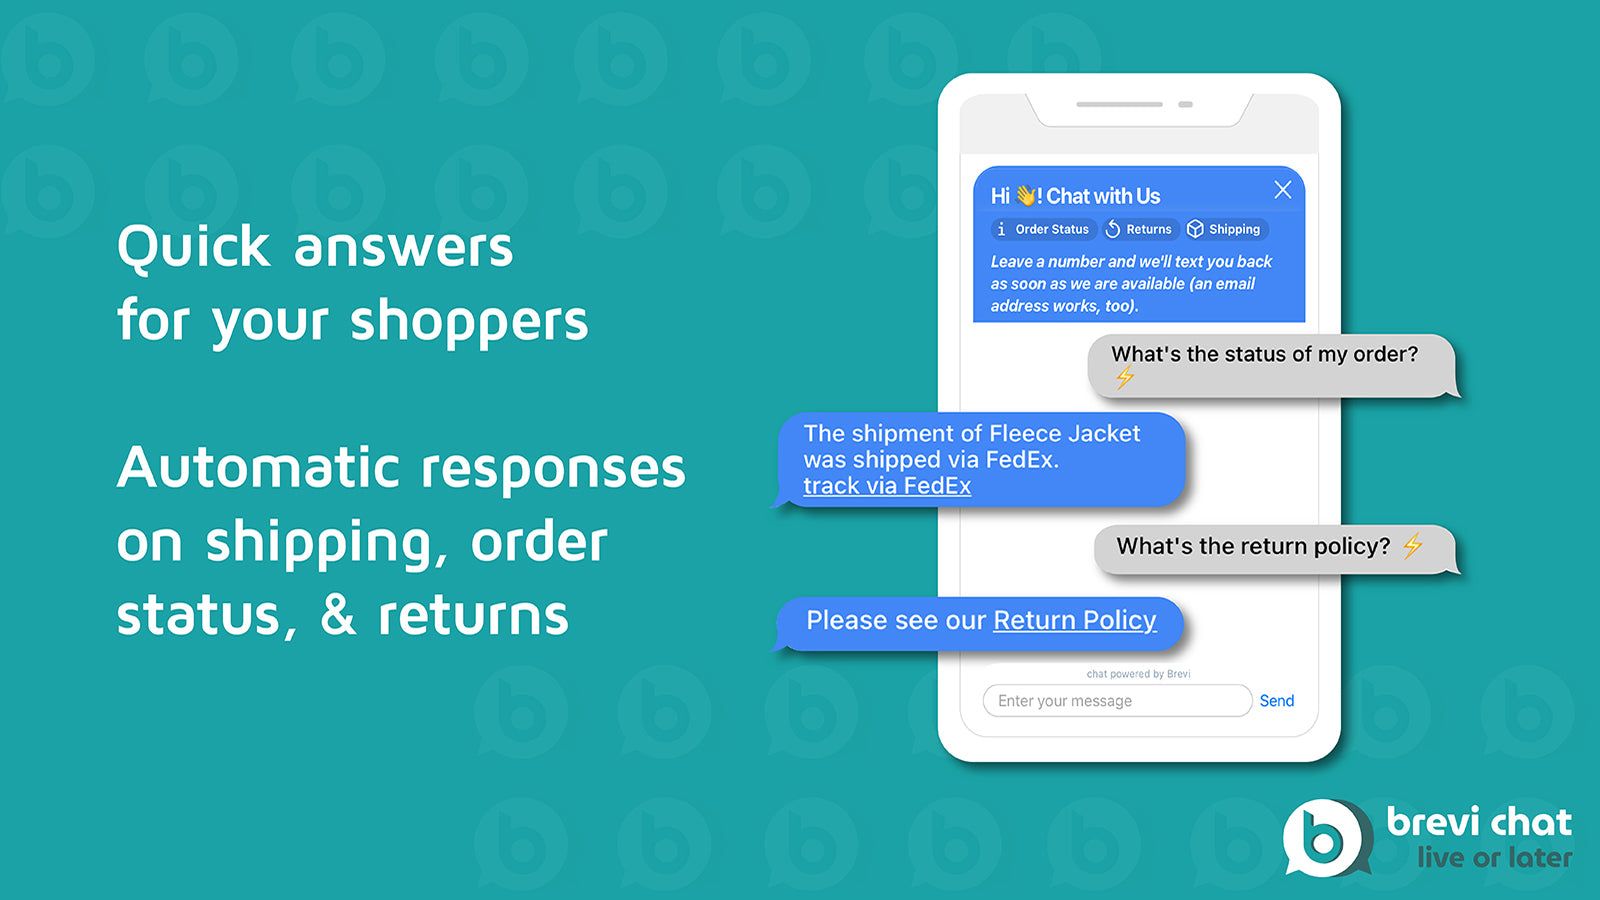 Quick, automatic answers for your shoppers on shipping etc.